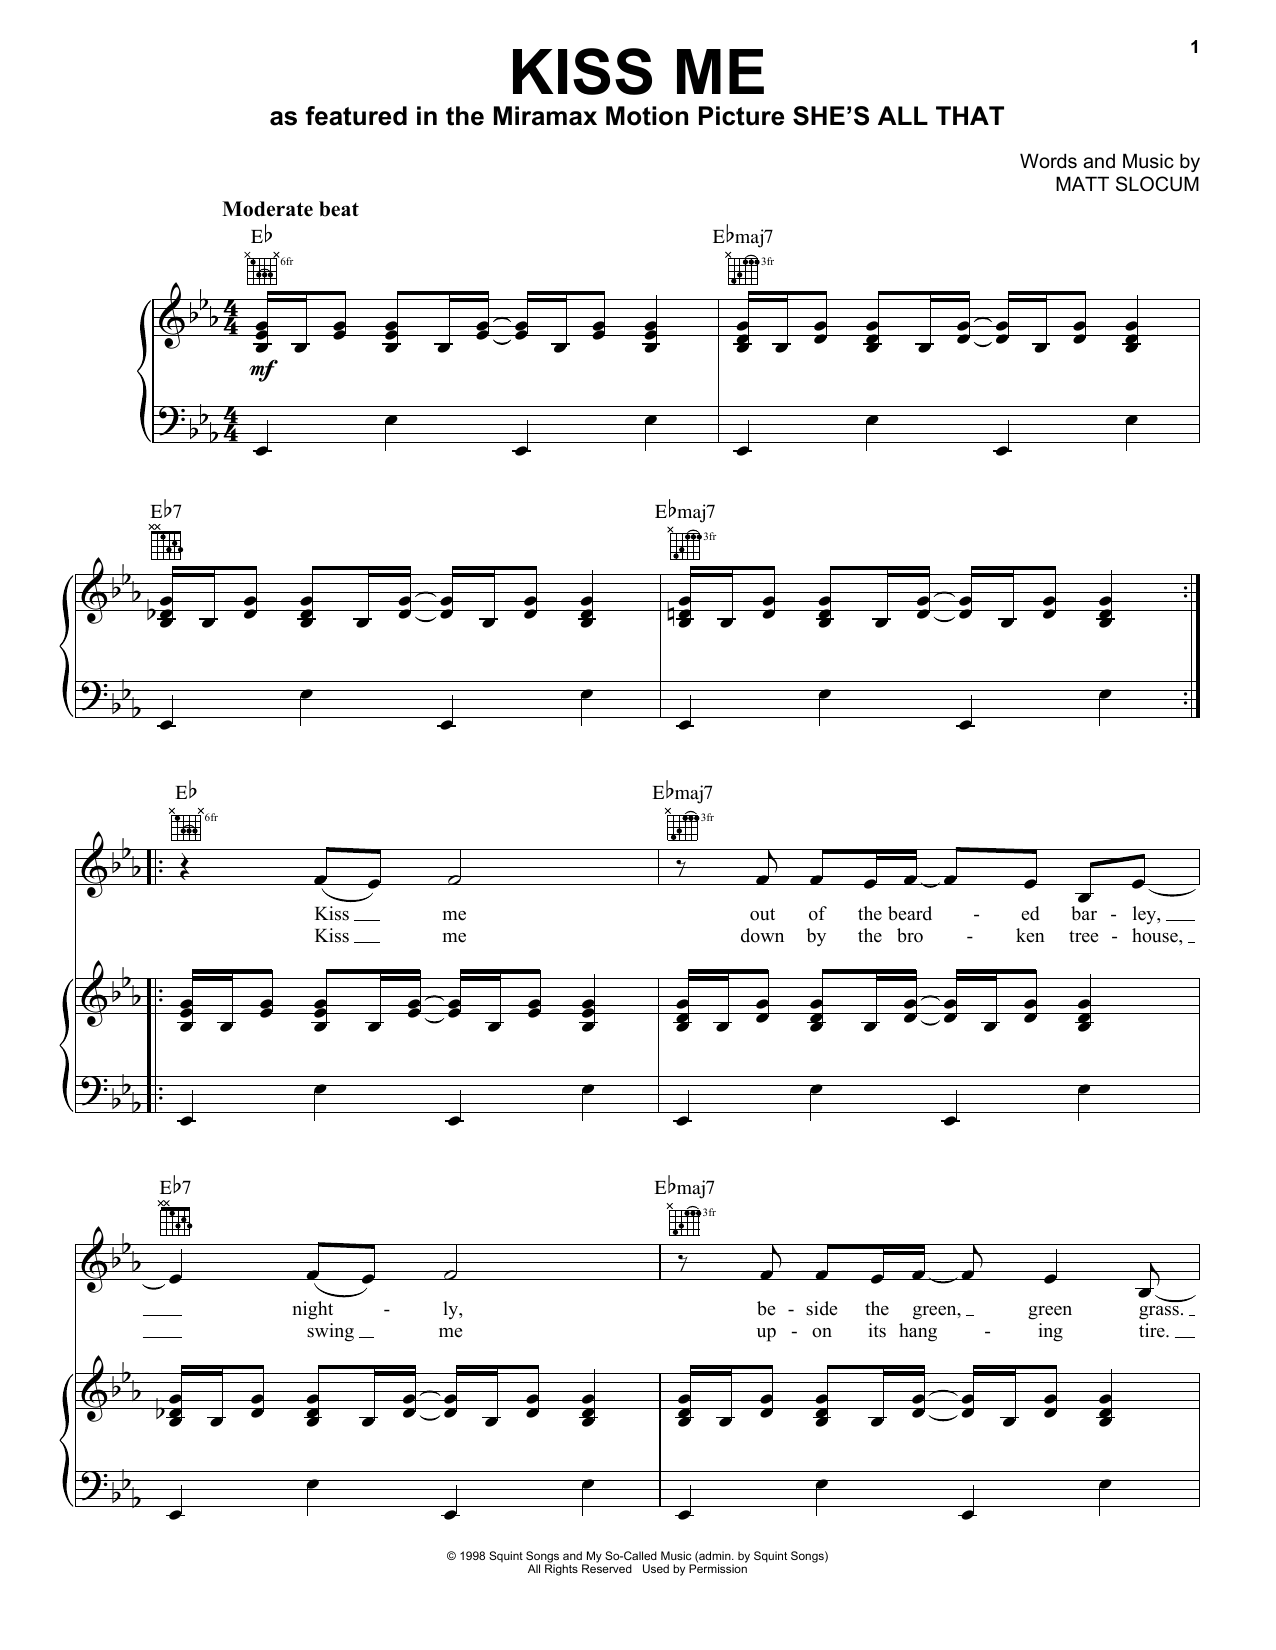 Download Sixpence None The Richer Kiss Me Sheet Music